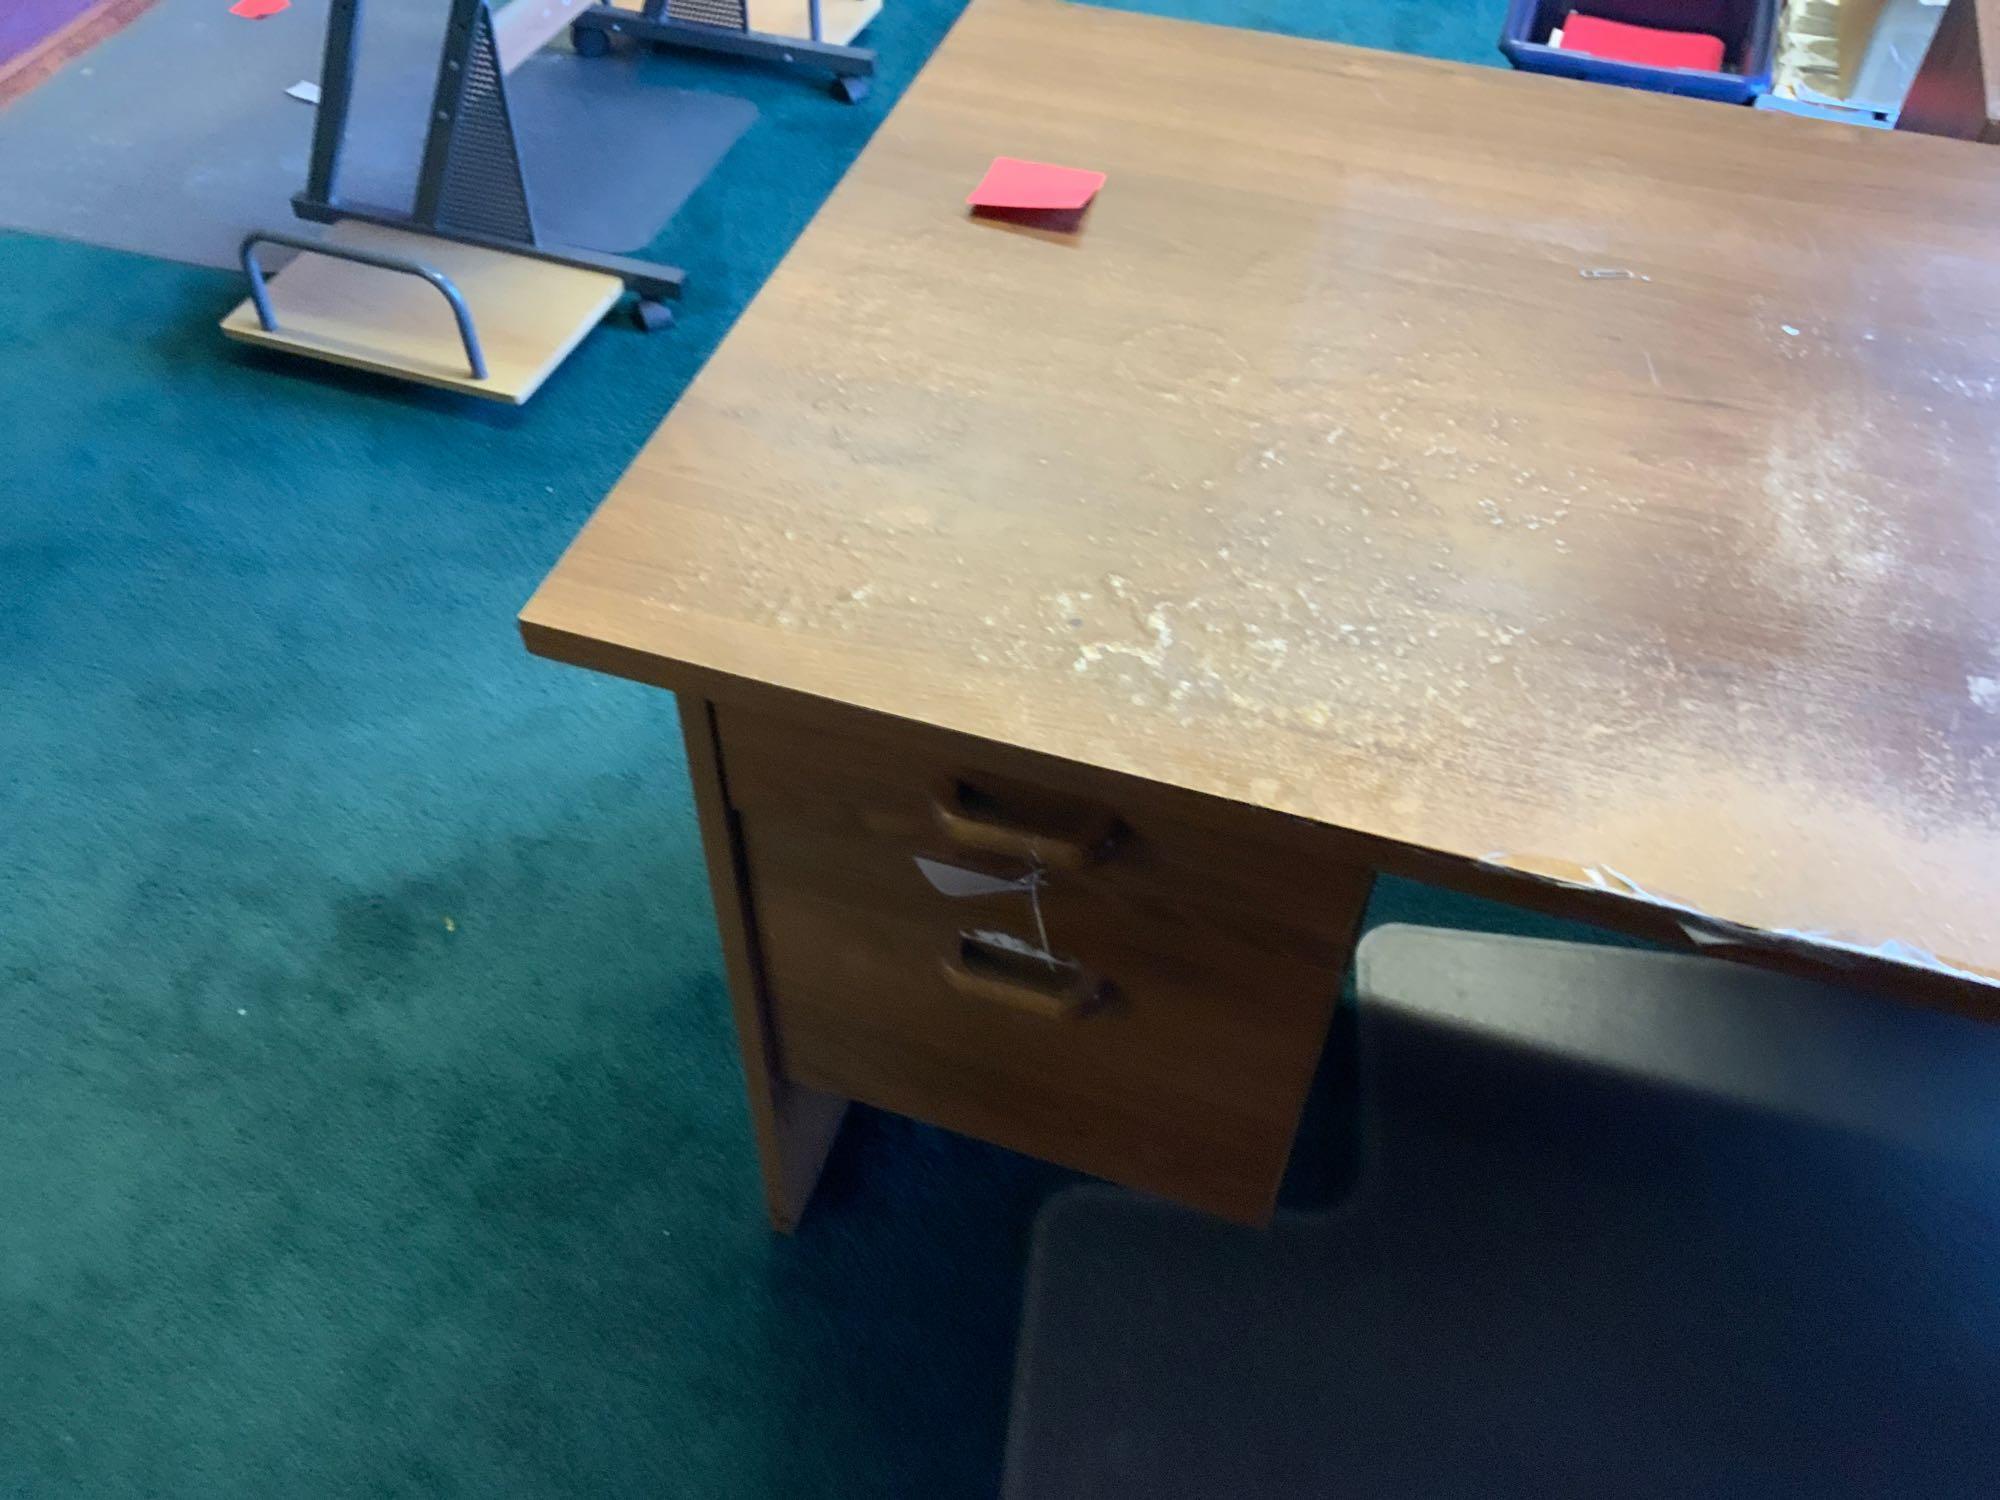 Office Desk - damage desk top Pickup will be on Monday 3/29 from 1-6 pm at 1324 S. 119th Street. All